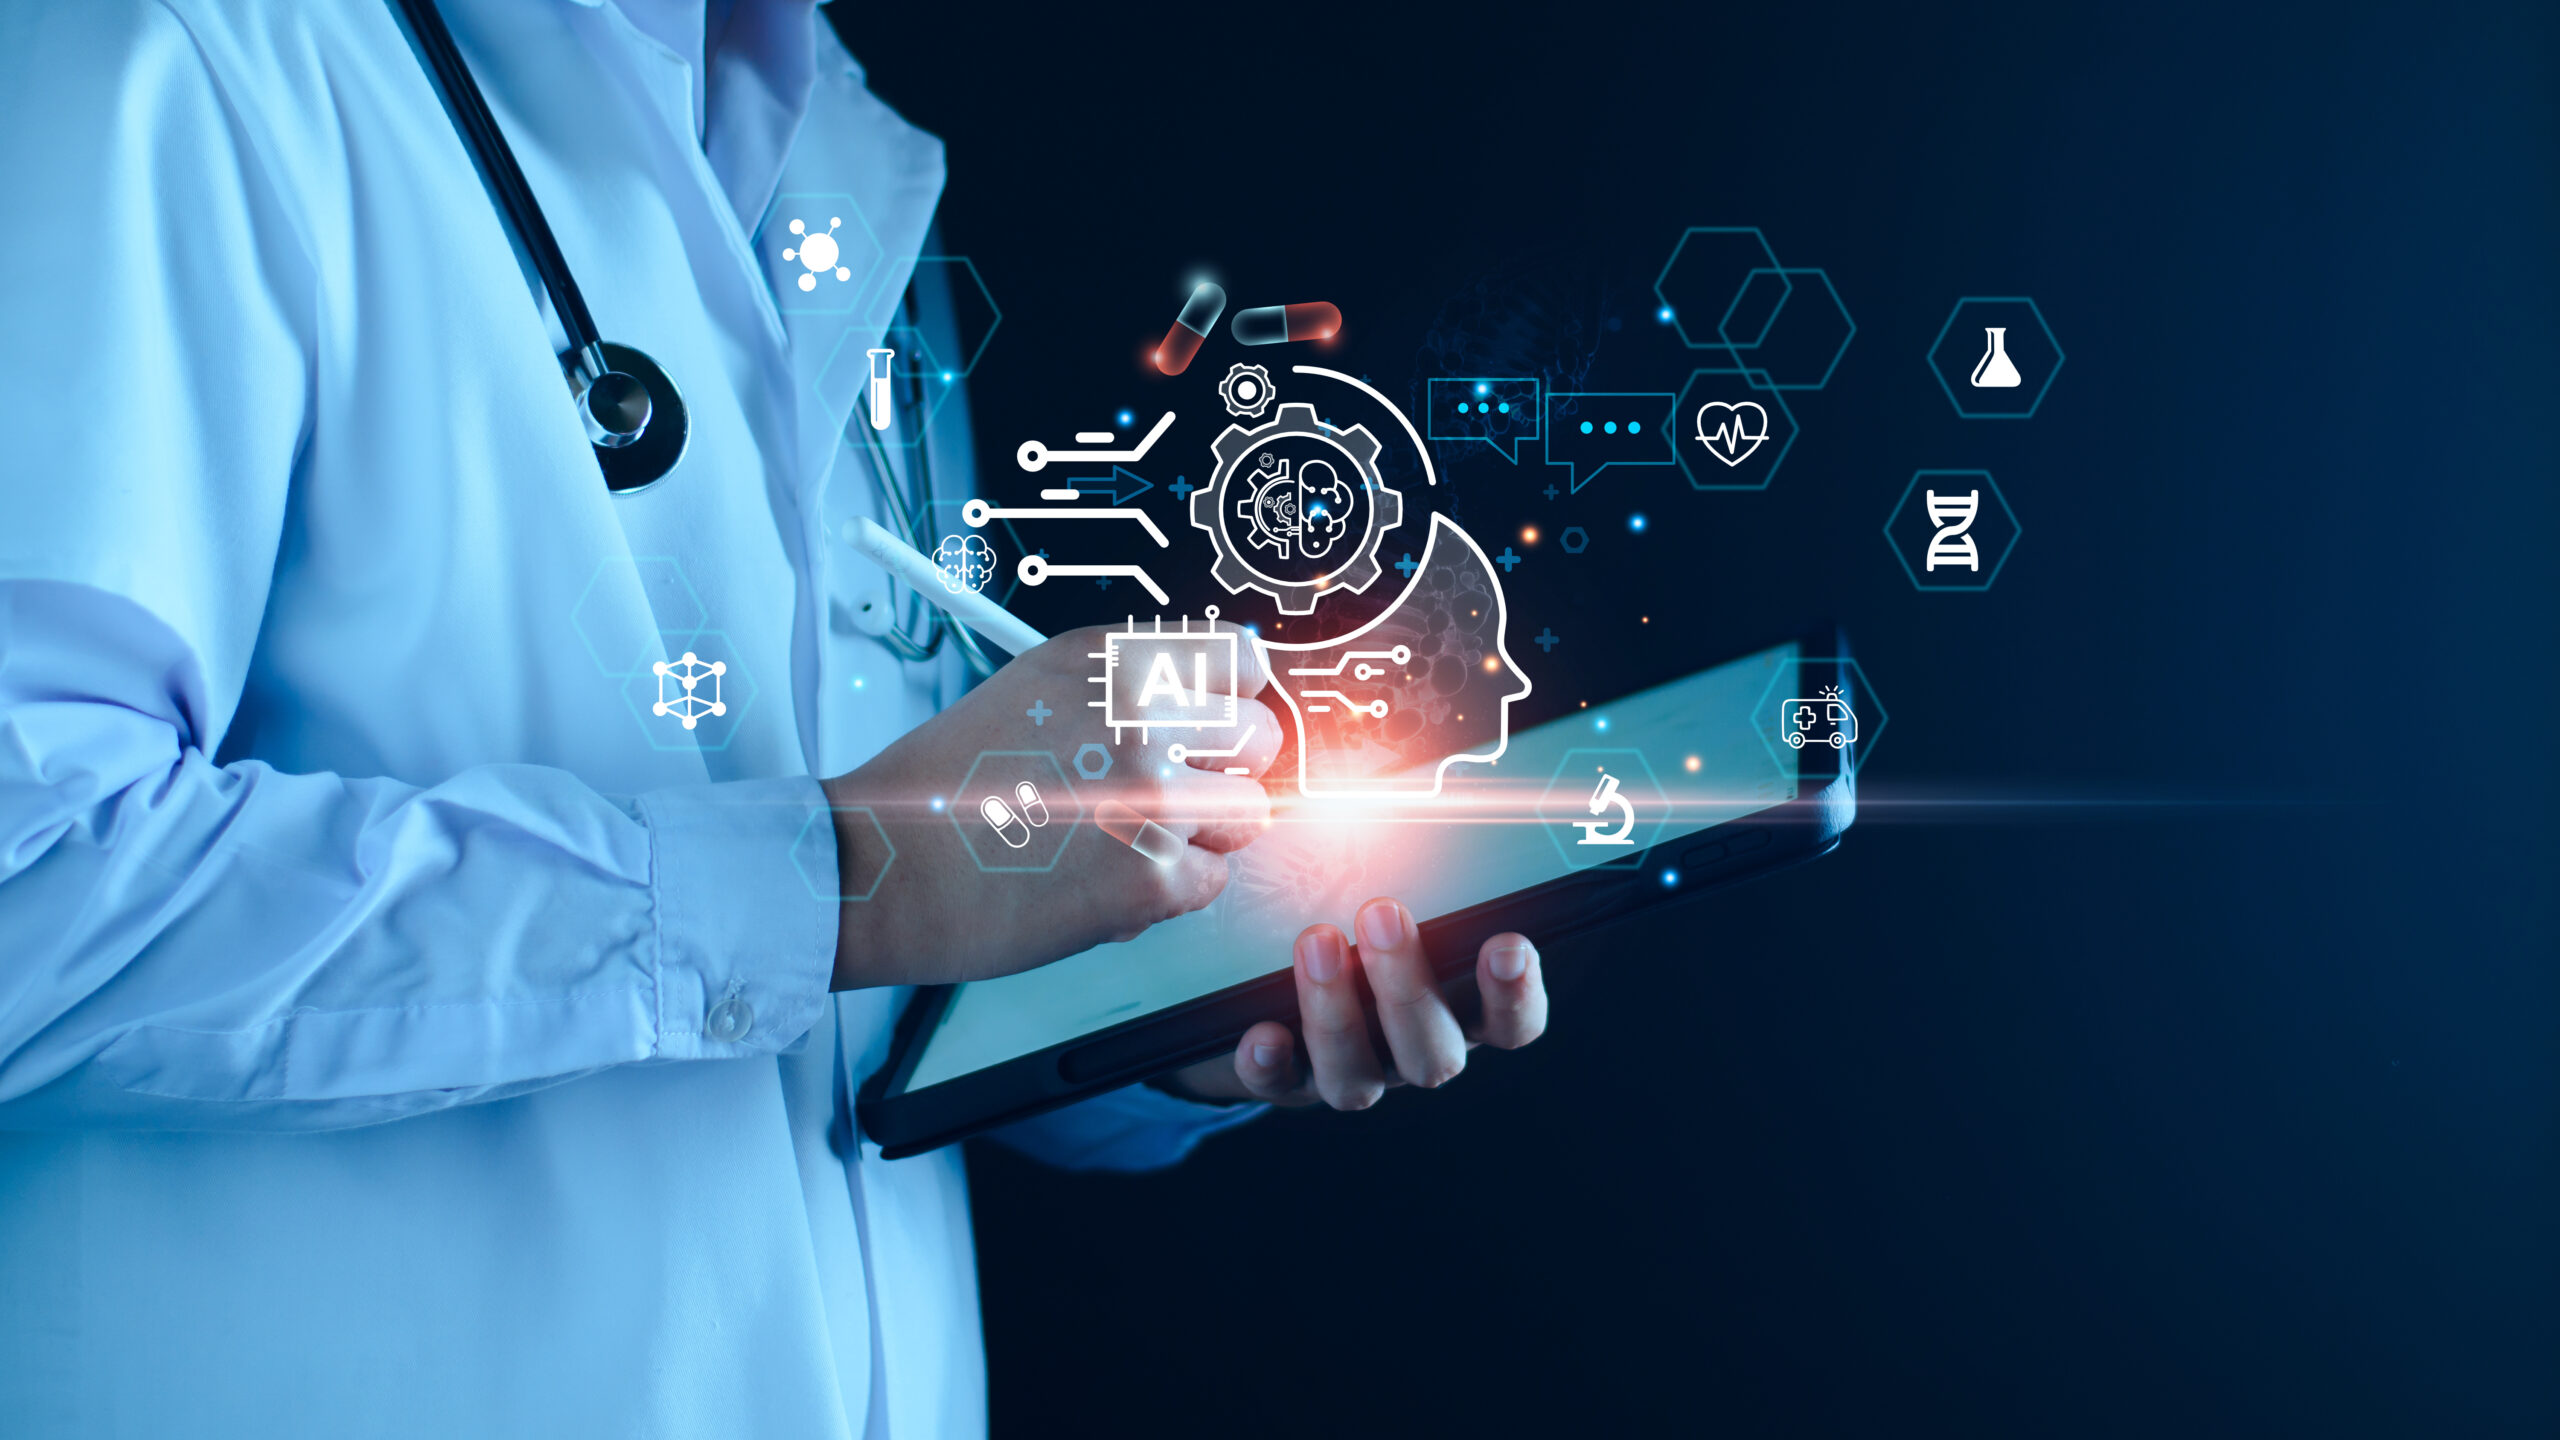 Medical technology, doctor use AI robots for diagnosis, care, and increasing accuracy patient treatment in future. Medical research and development innovation technology to improve patient health.